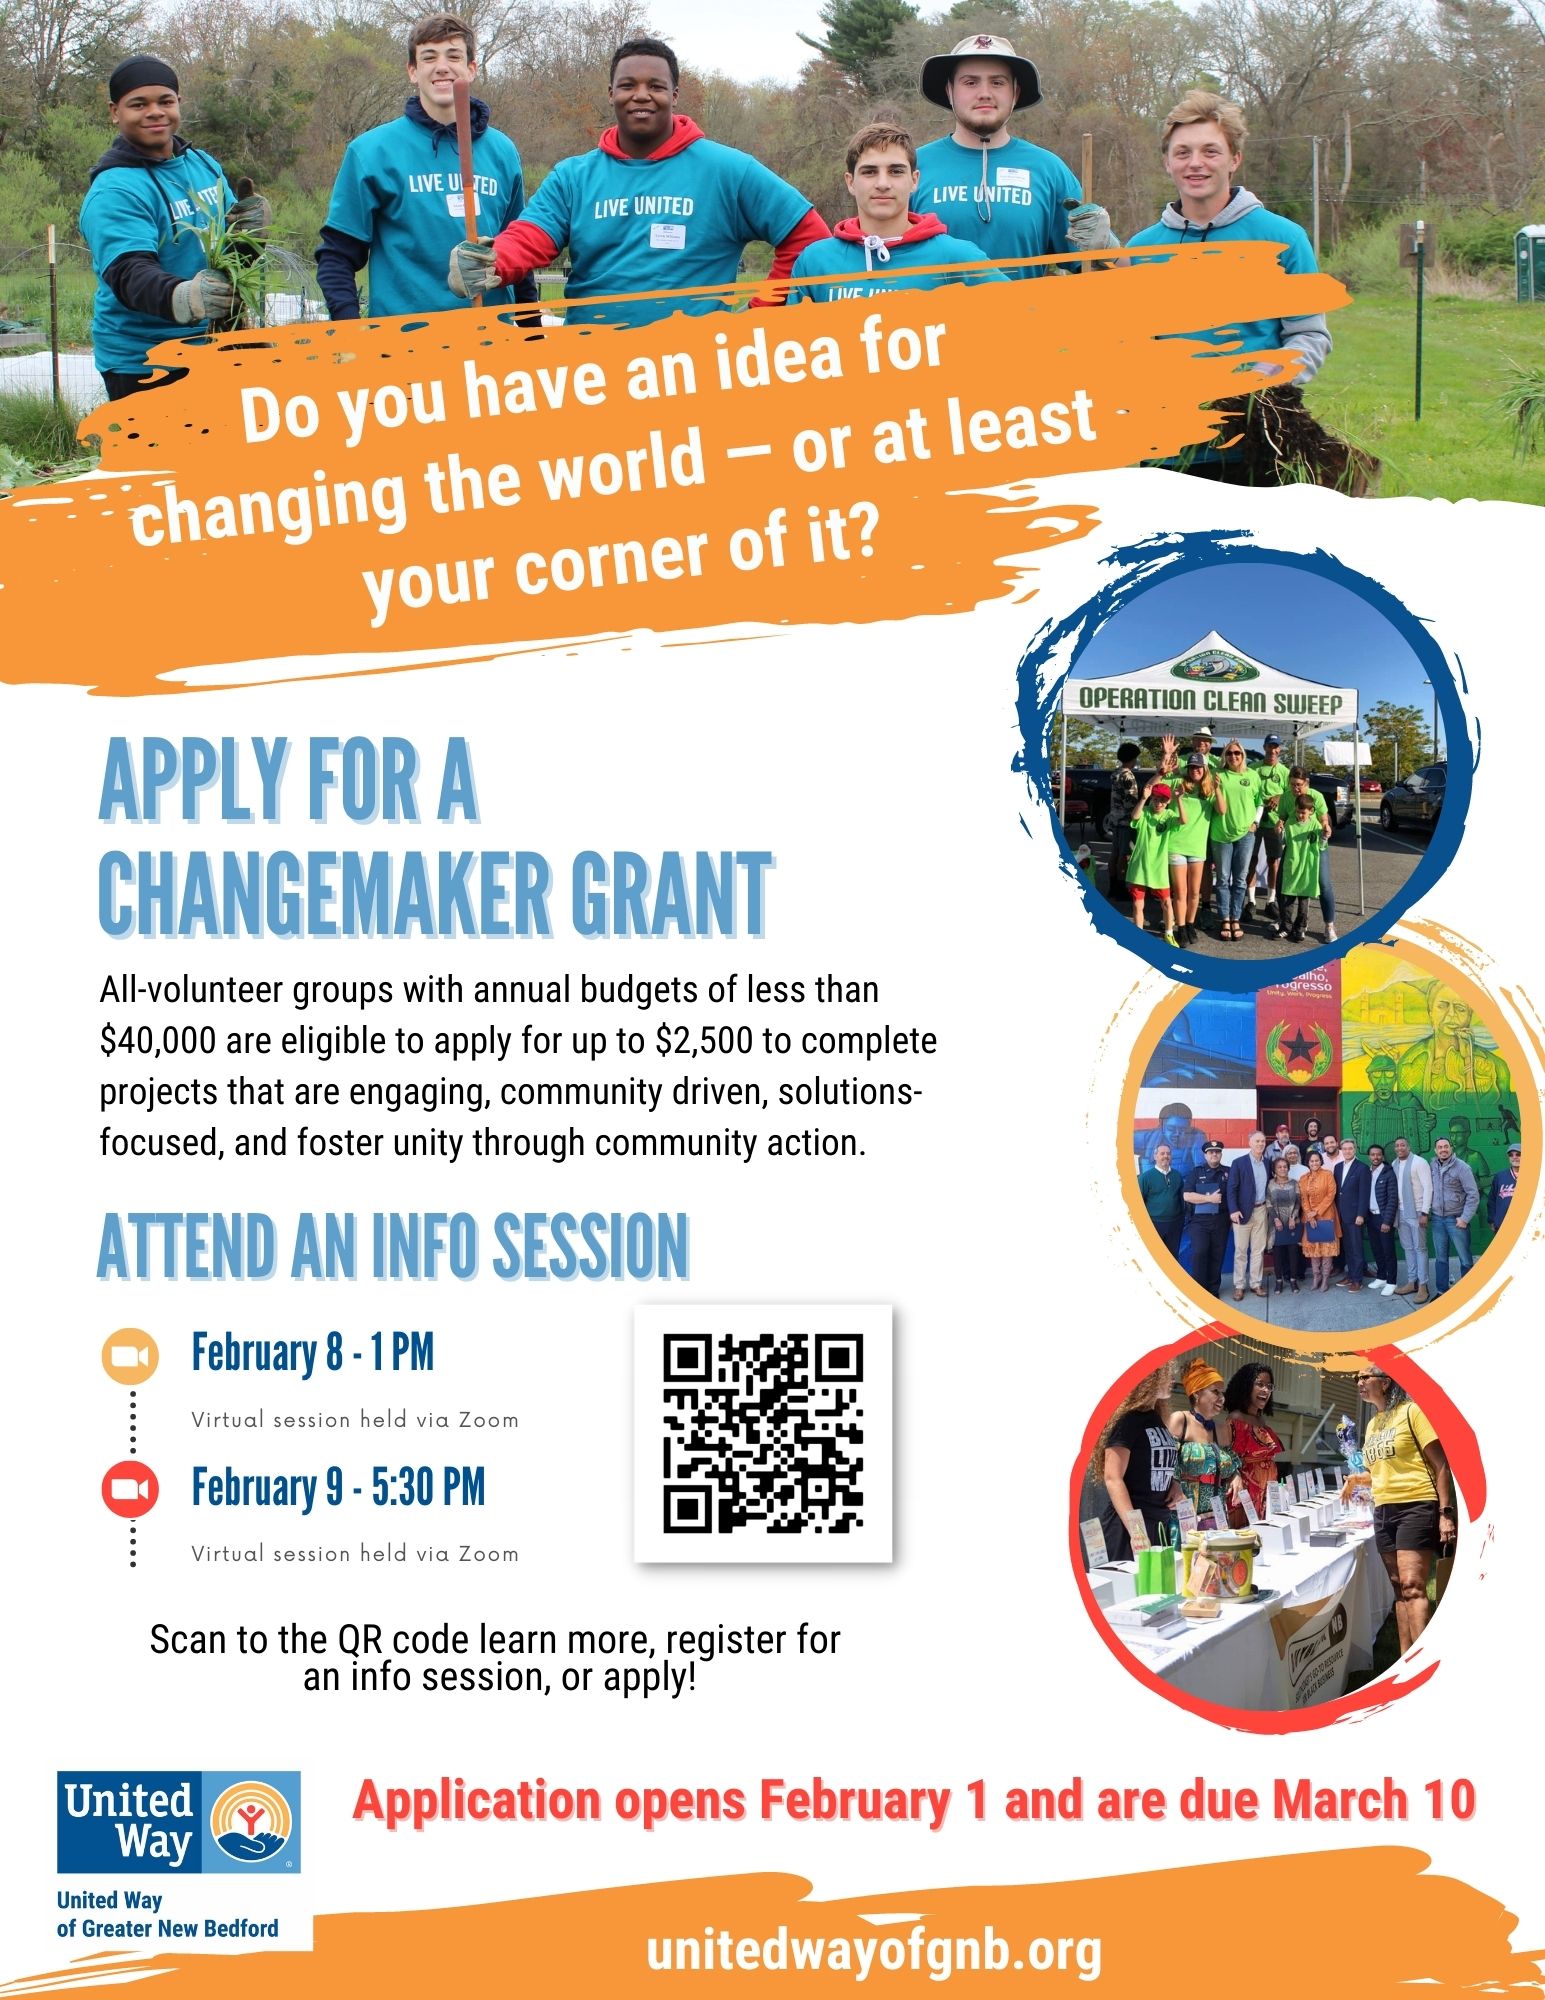 Changemaker info sessions will be held on February 7& 8- links below to register